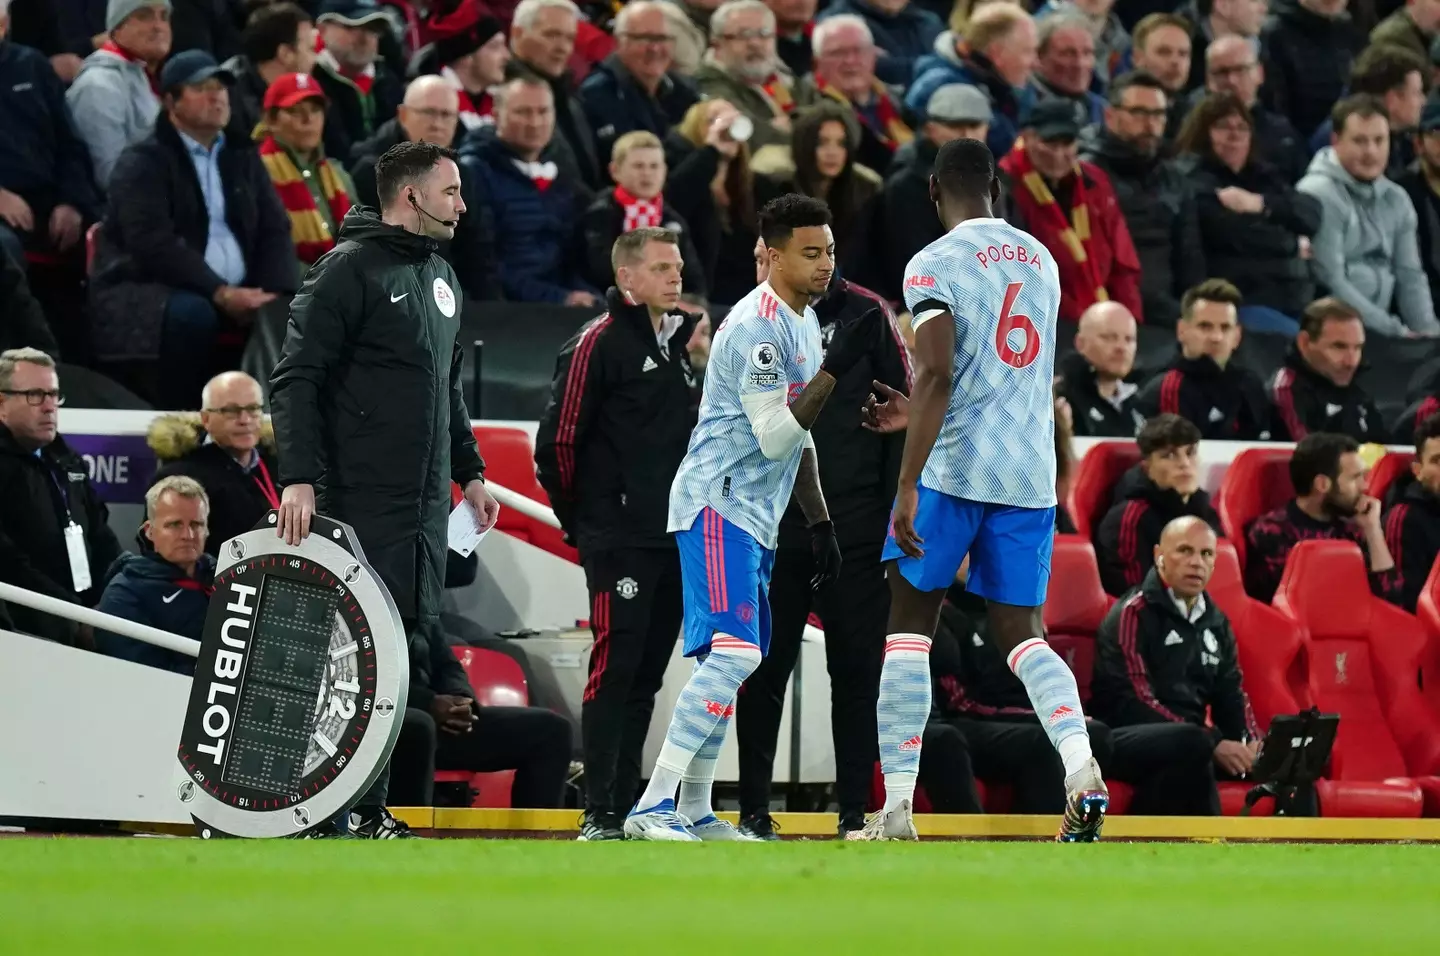 Paul Pogba being substituted early due to injury against Liverpool in what ended up being a 4-0 defeat for Manchester United |